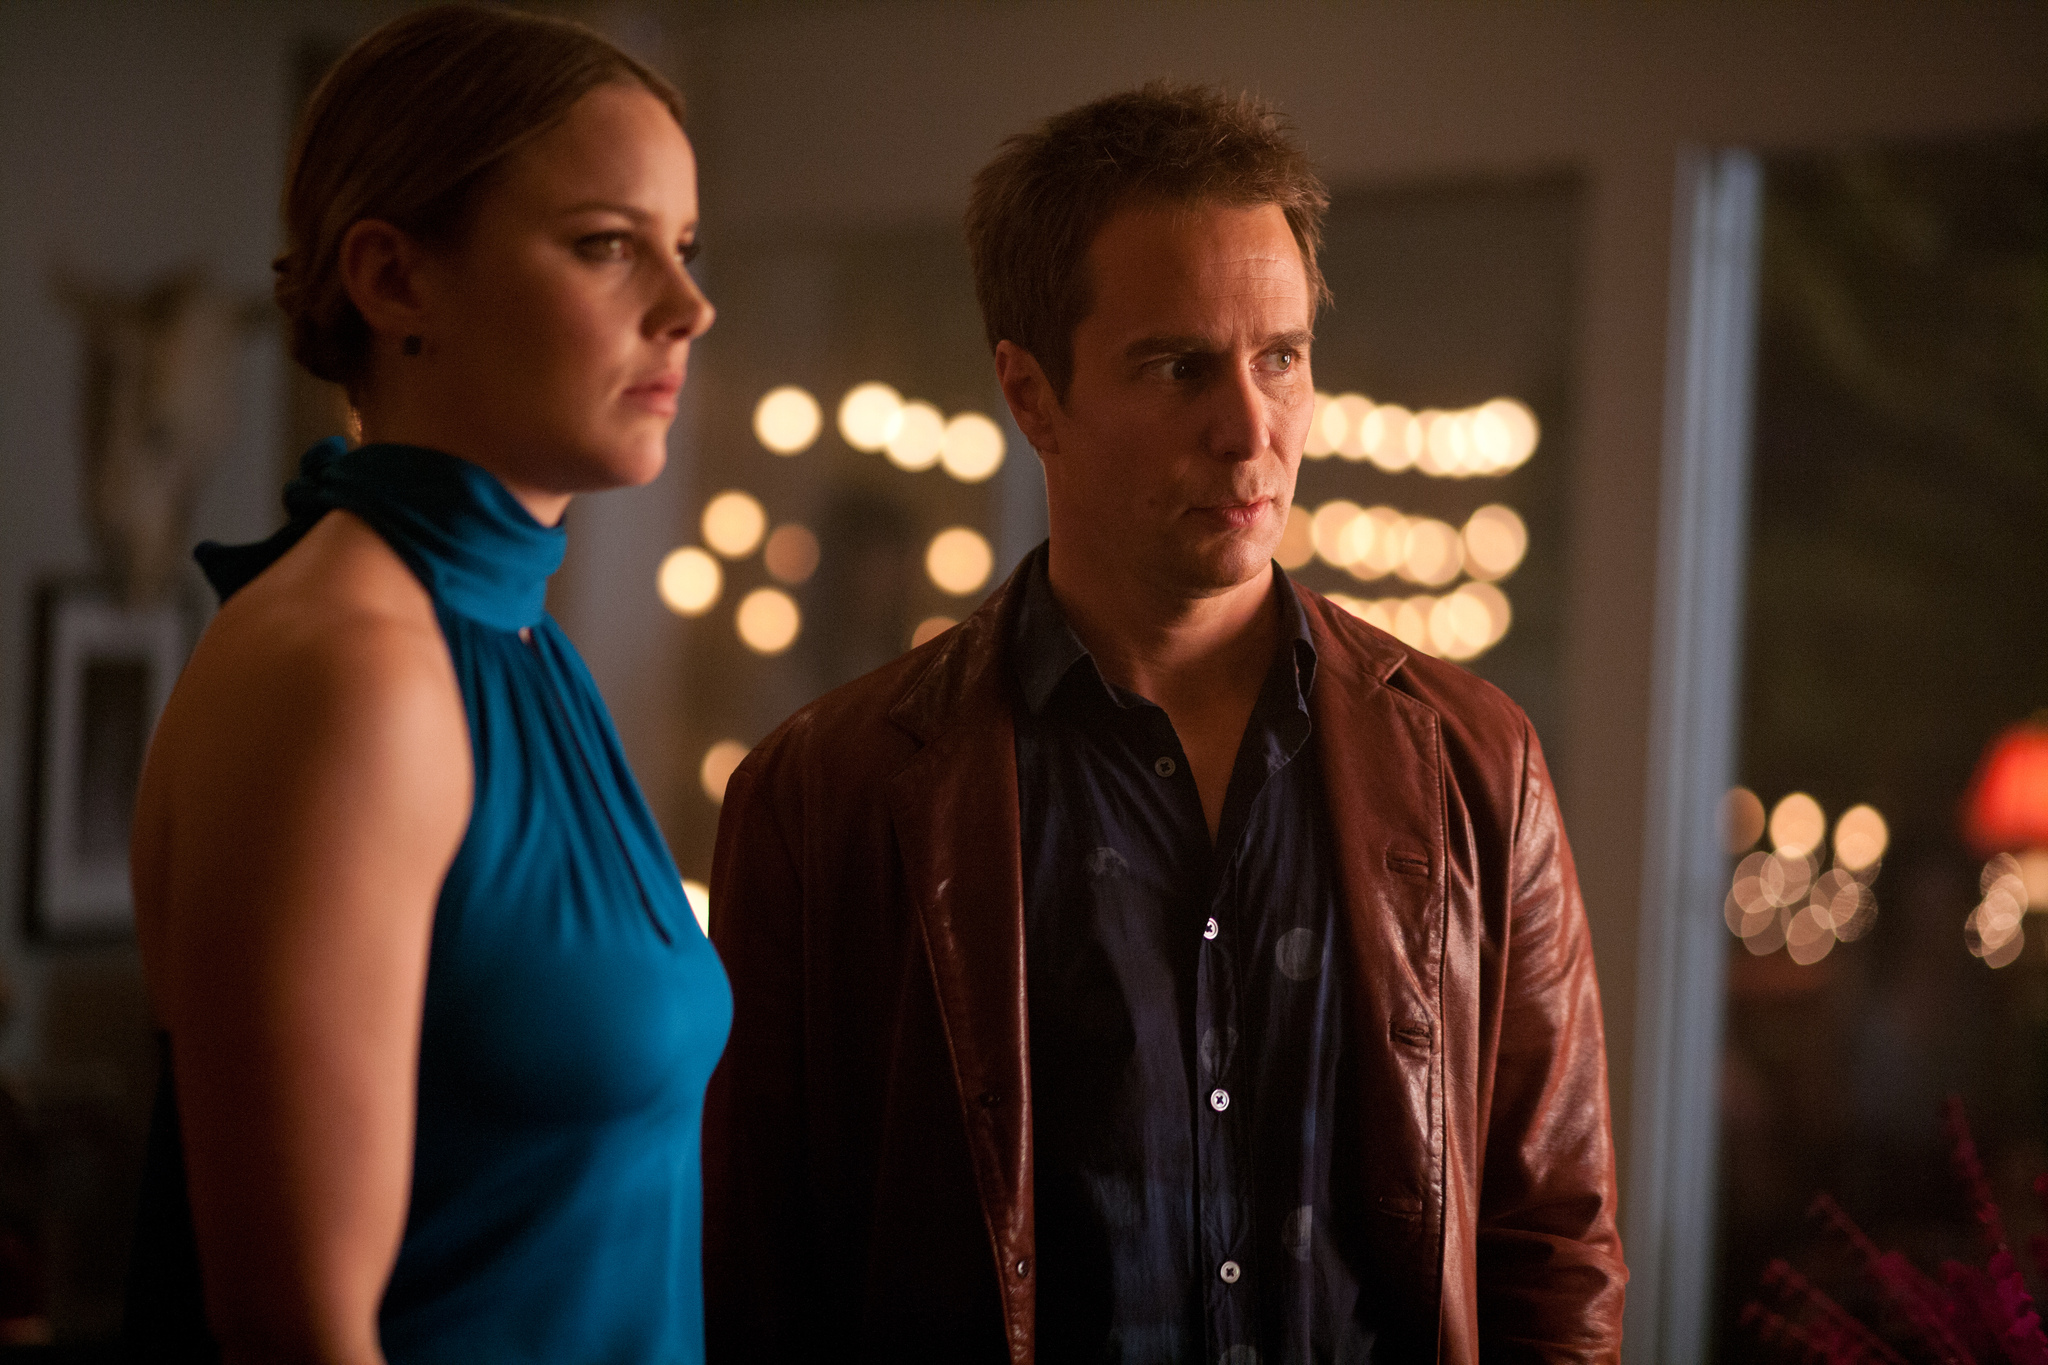 Still of Sam Rockwell and Abbie Cornish in Septyni psichopatai (2012)